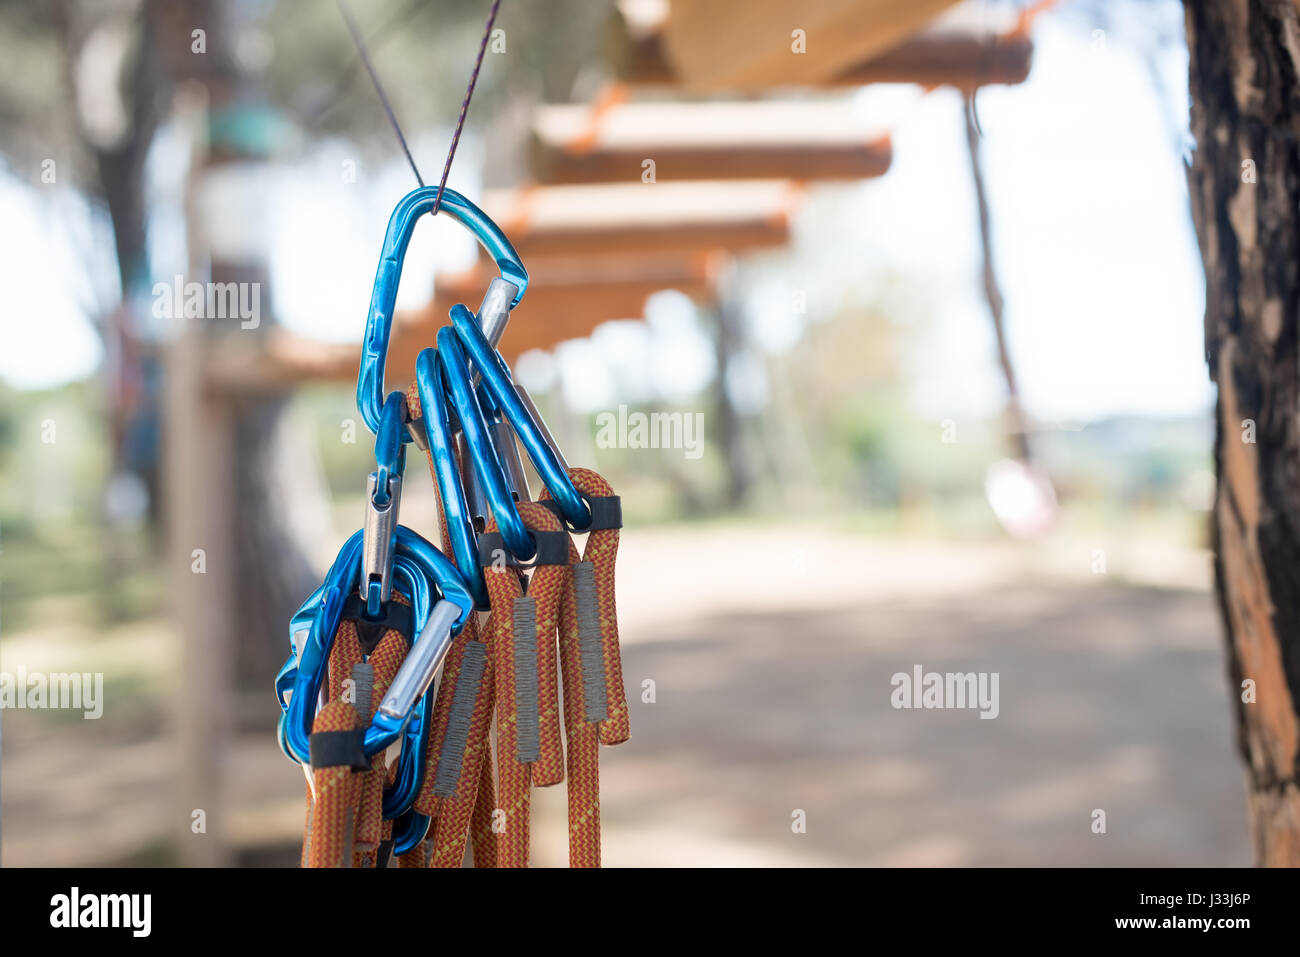 Many blue carabiner safety guarantee ready for use, adventure playground path out of focus in background Stock Photo